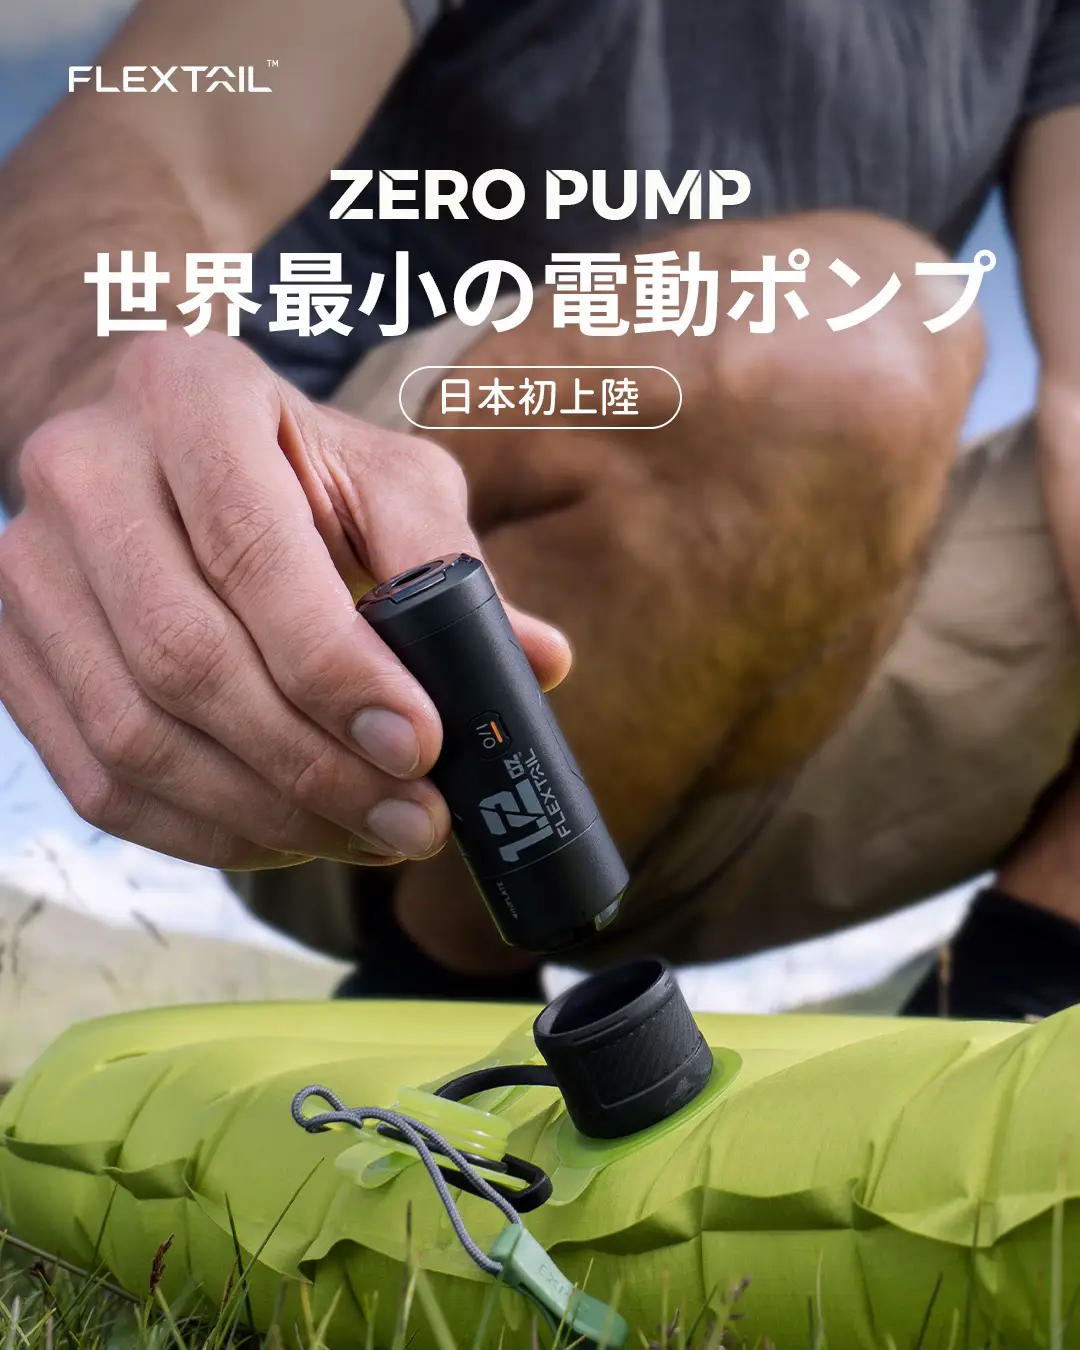 First landing in Japan] The world's smallest air mat specialized electric pump  ZERO PUMP, Gallery posted by FLEXTAIL【公式】